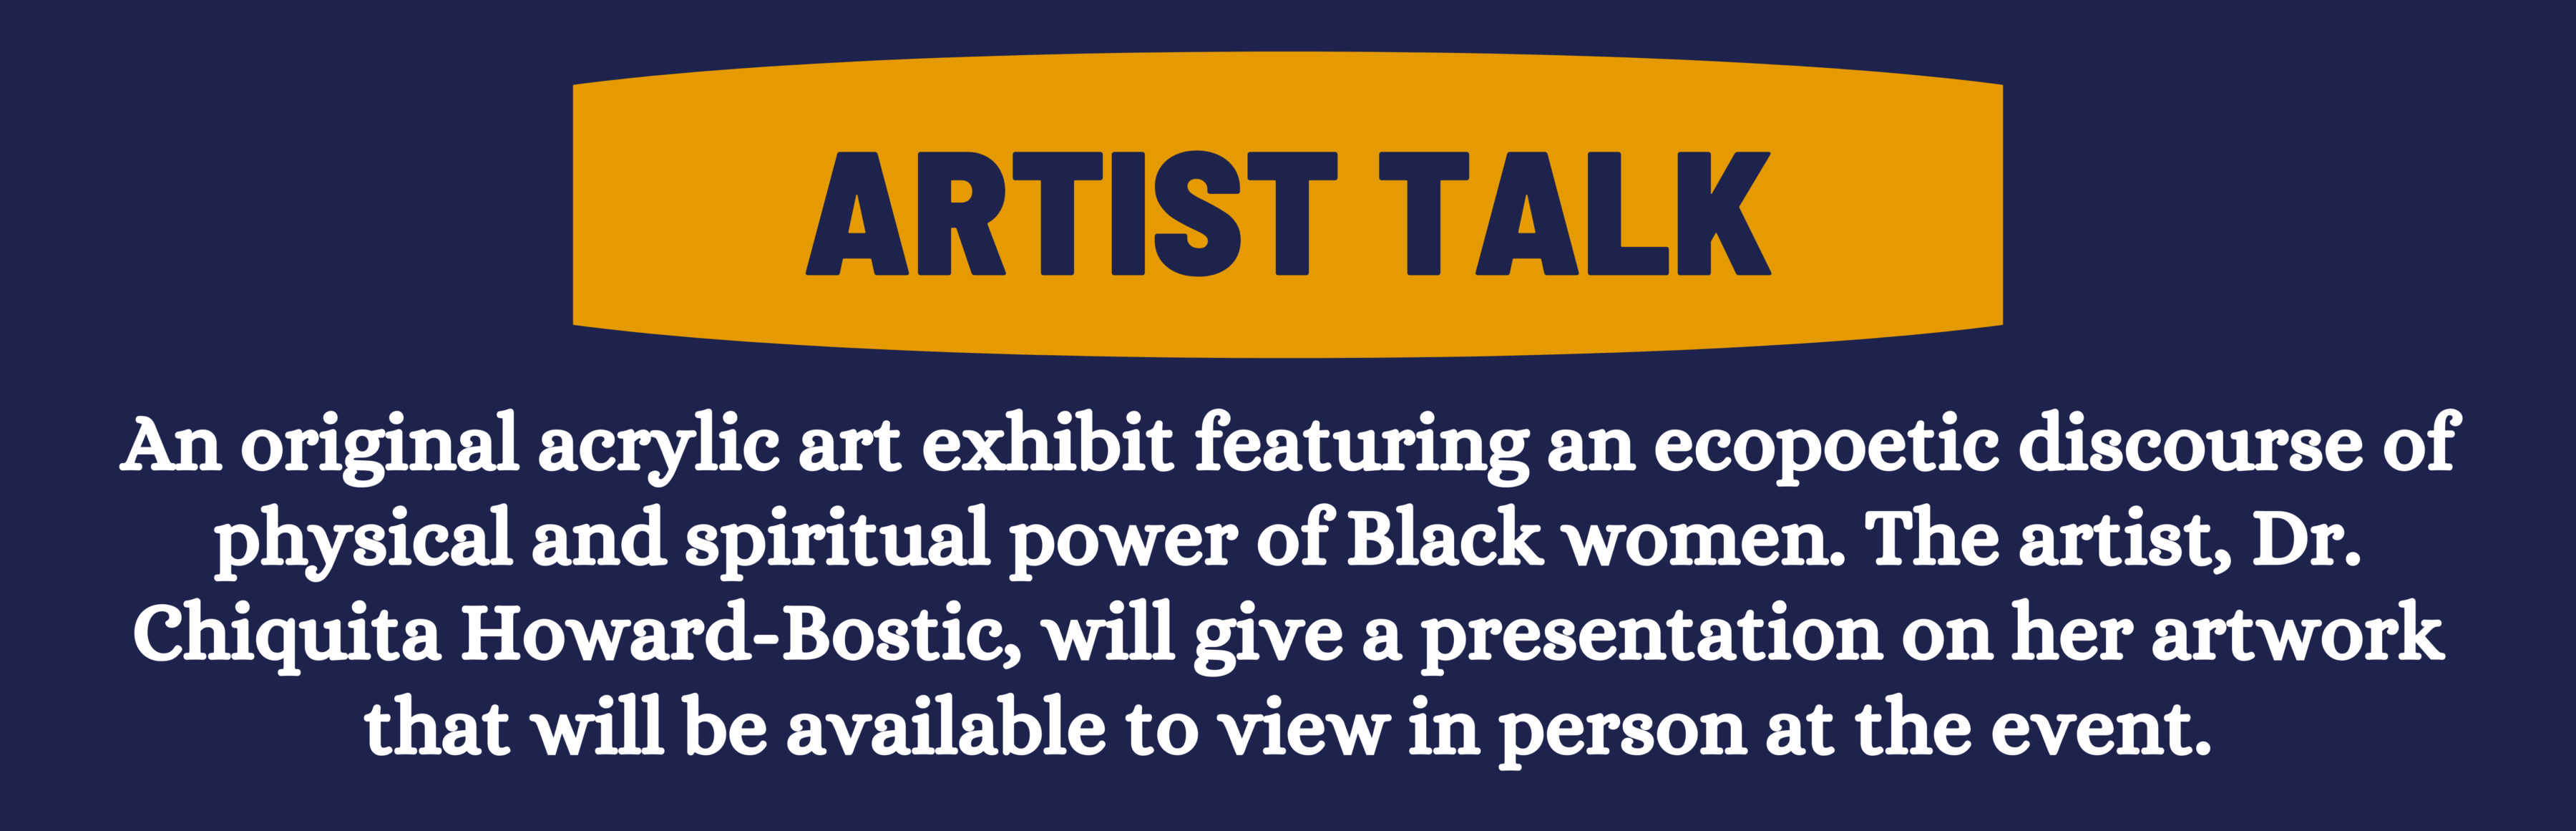 artist talk: An original acrylic art exhibit featuring an ecopoetic discourse of physical and spiritual power of Black women. The artist, Dr. Chiquita Howard-Bostic, will give a presentation on her artwork that will be available to view in person at the event.